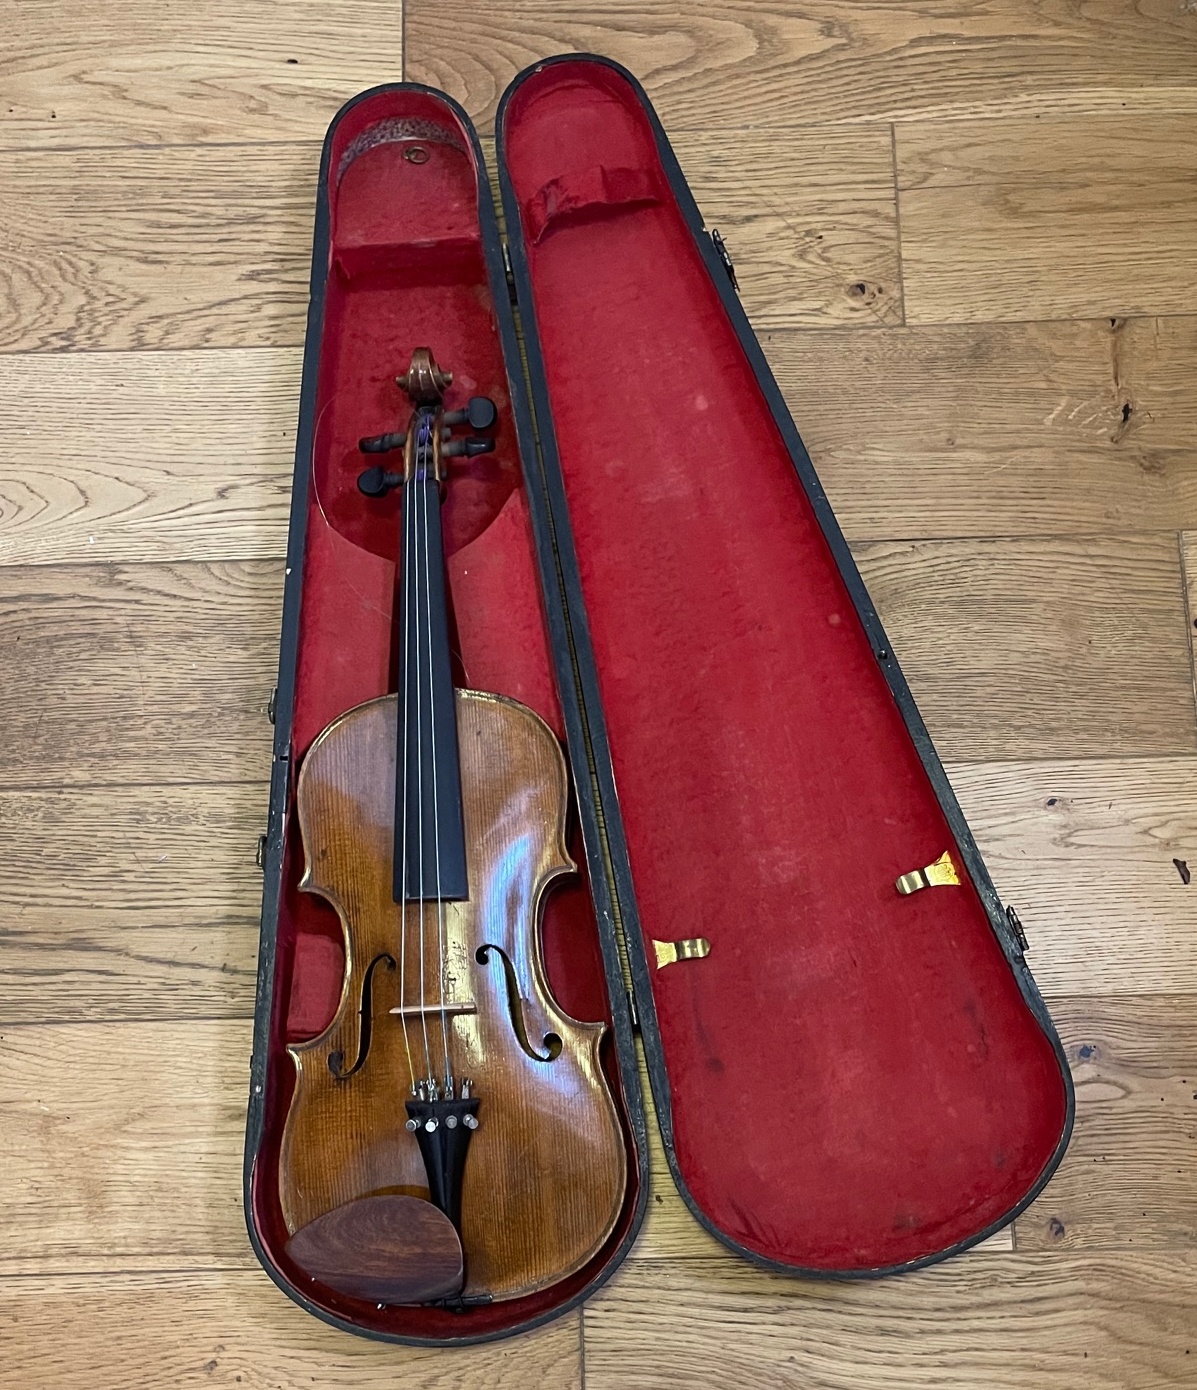 Antique HOPF stamped Violin - 23 1/2" overall with a 14 1/8" back.